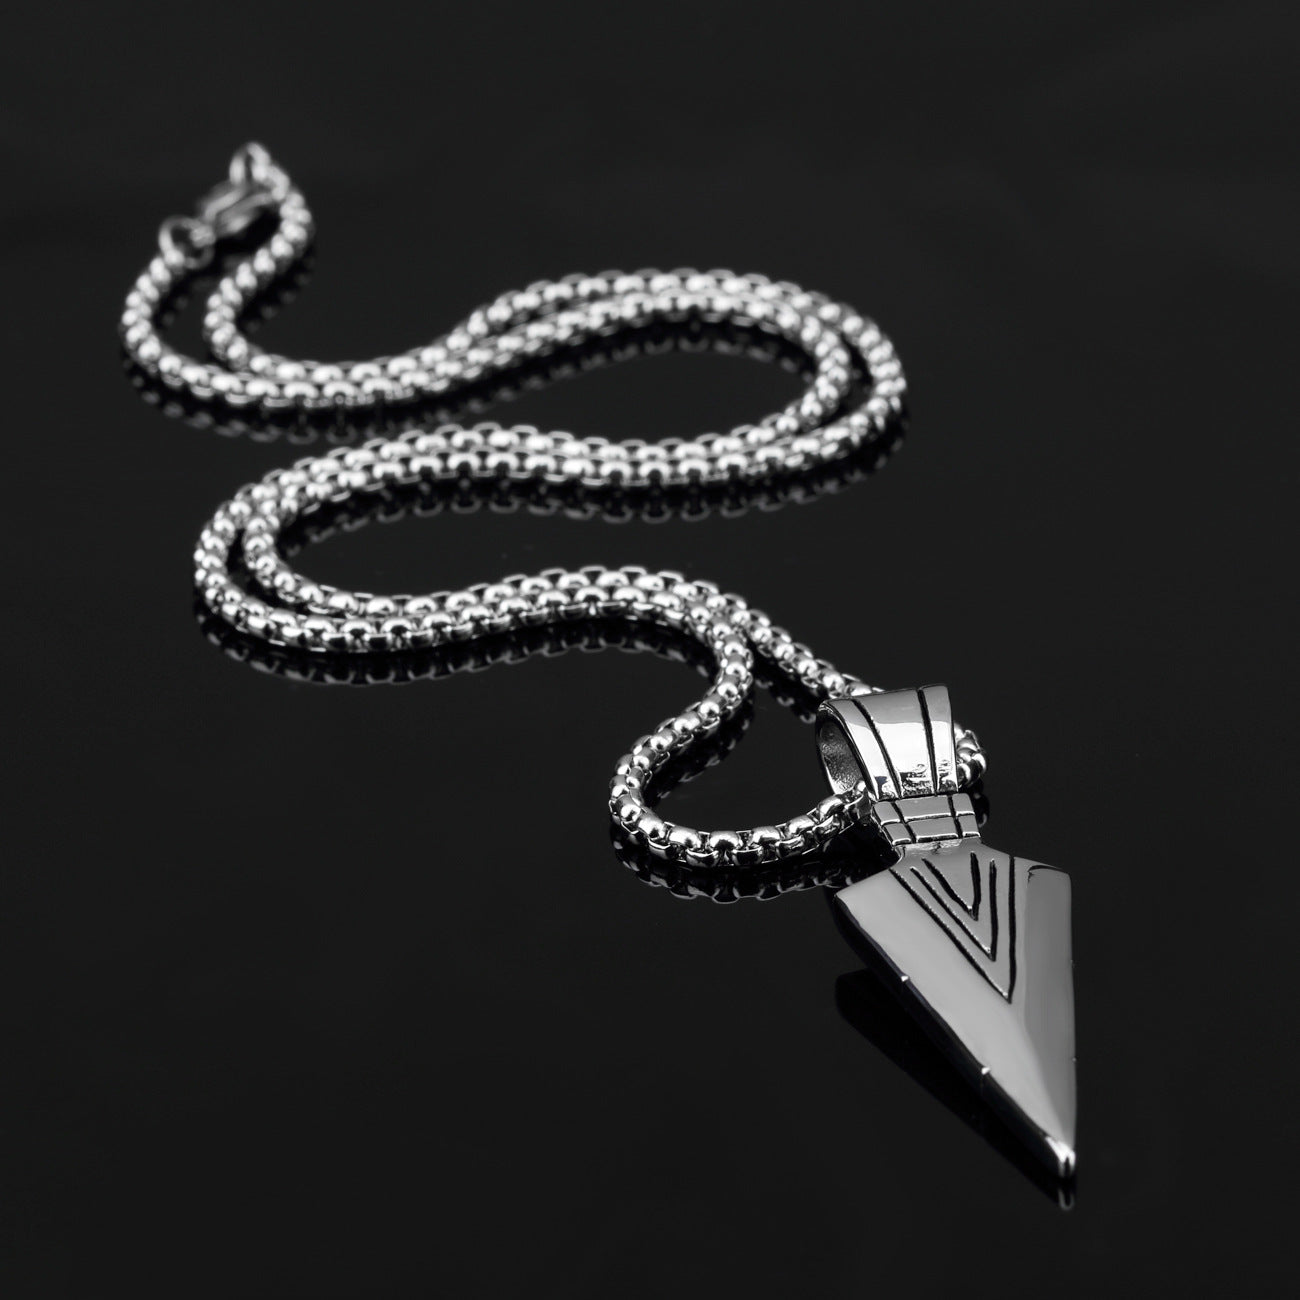 Fashion Personality Spearhead Pendant Street Hip Hop Necklace